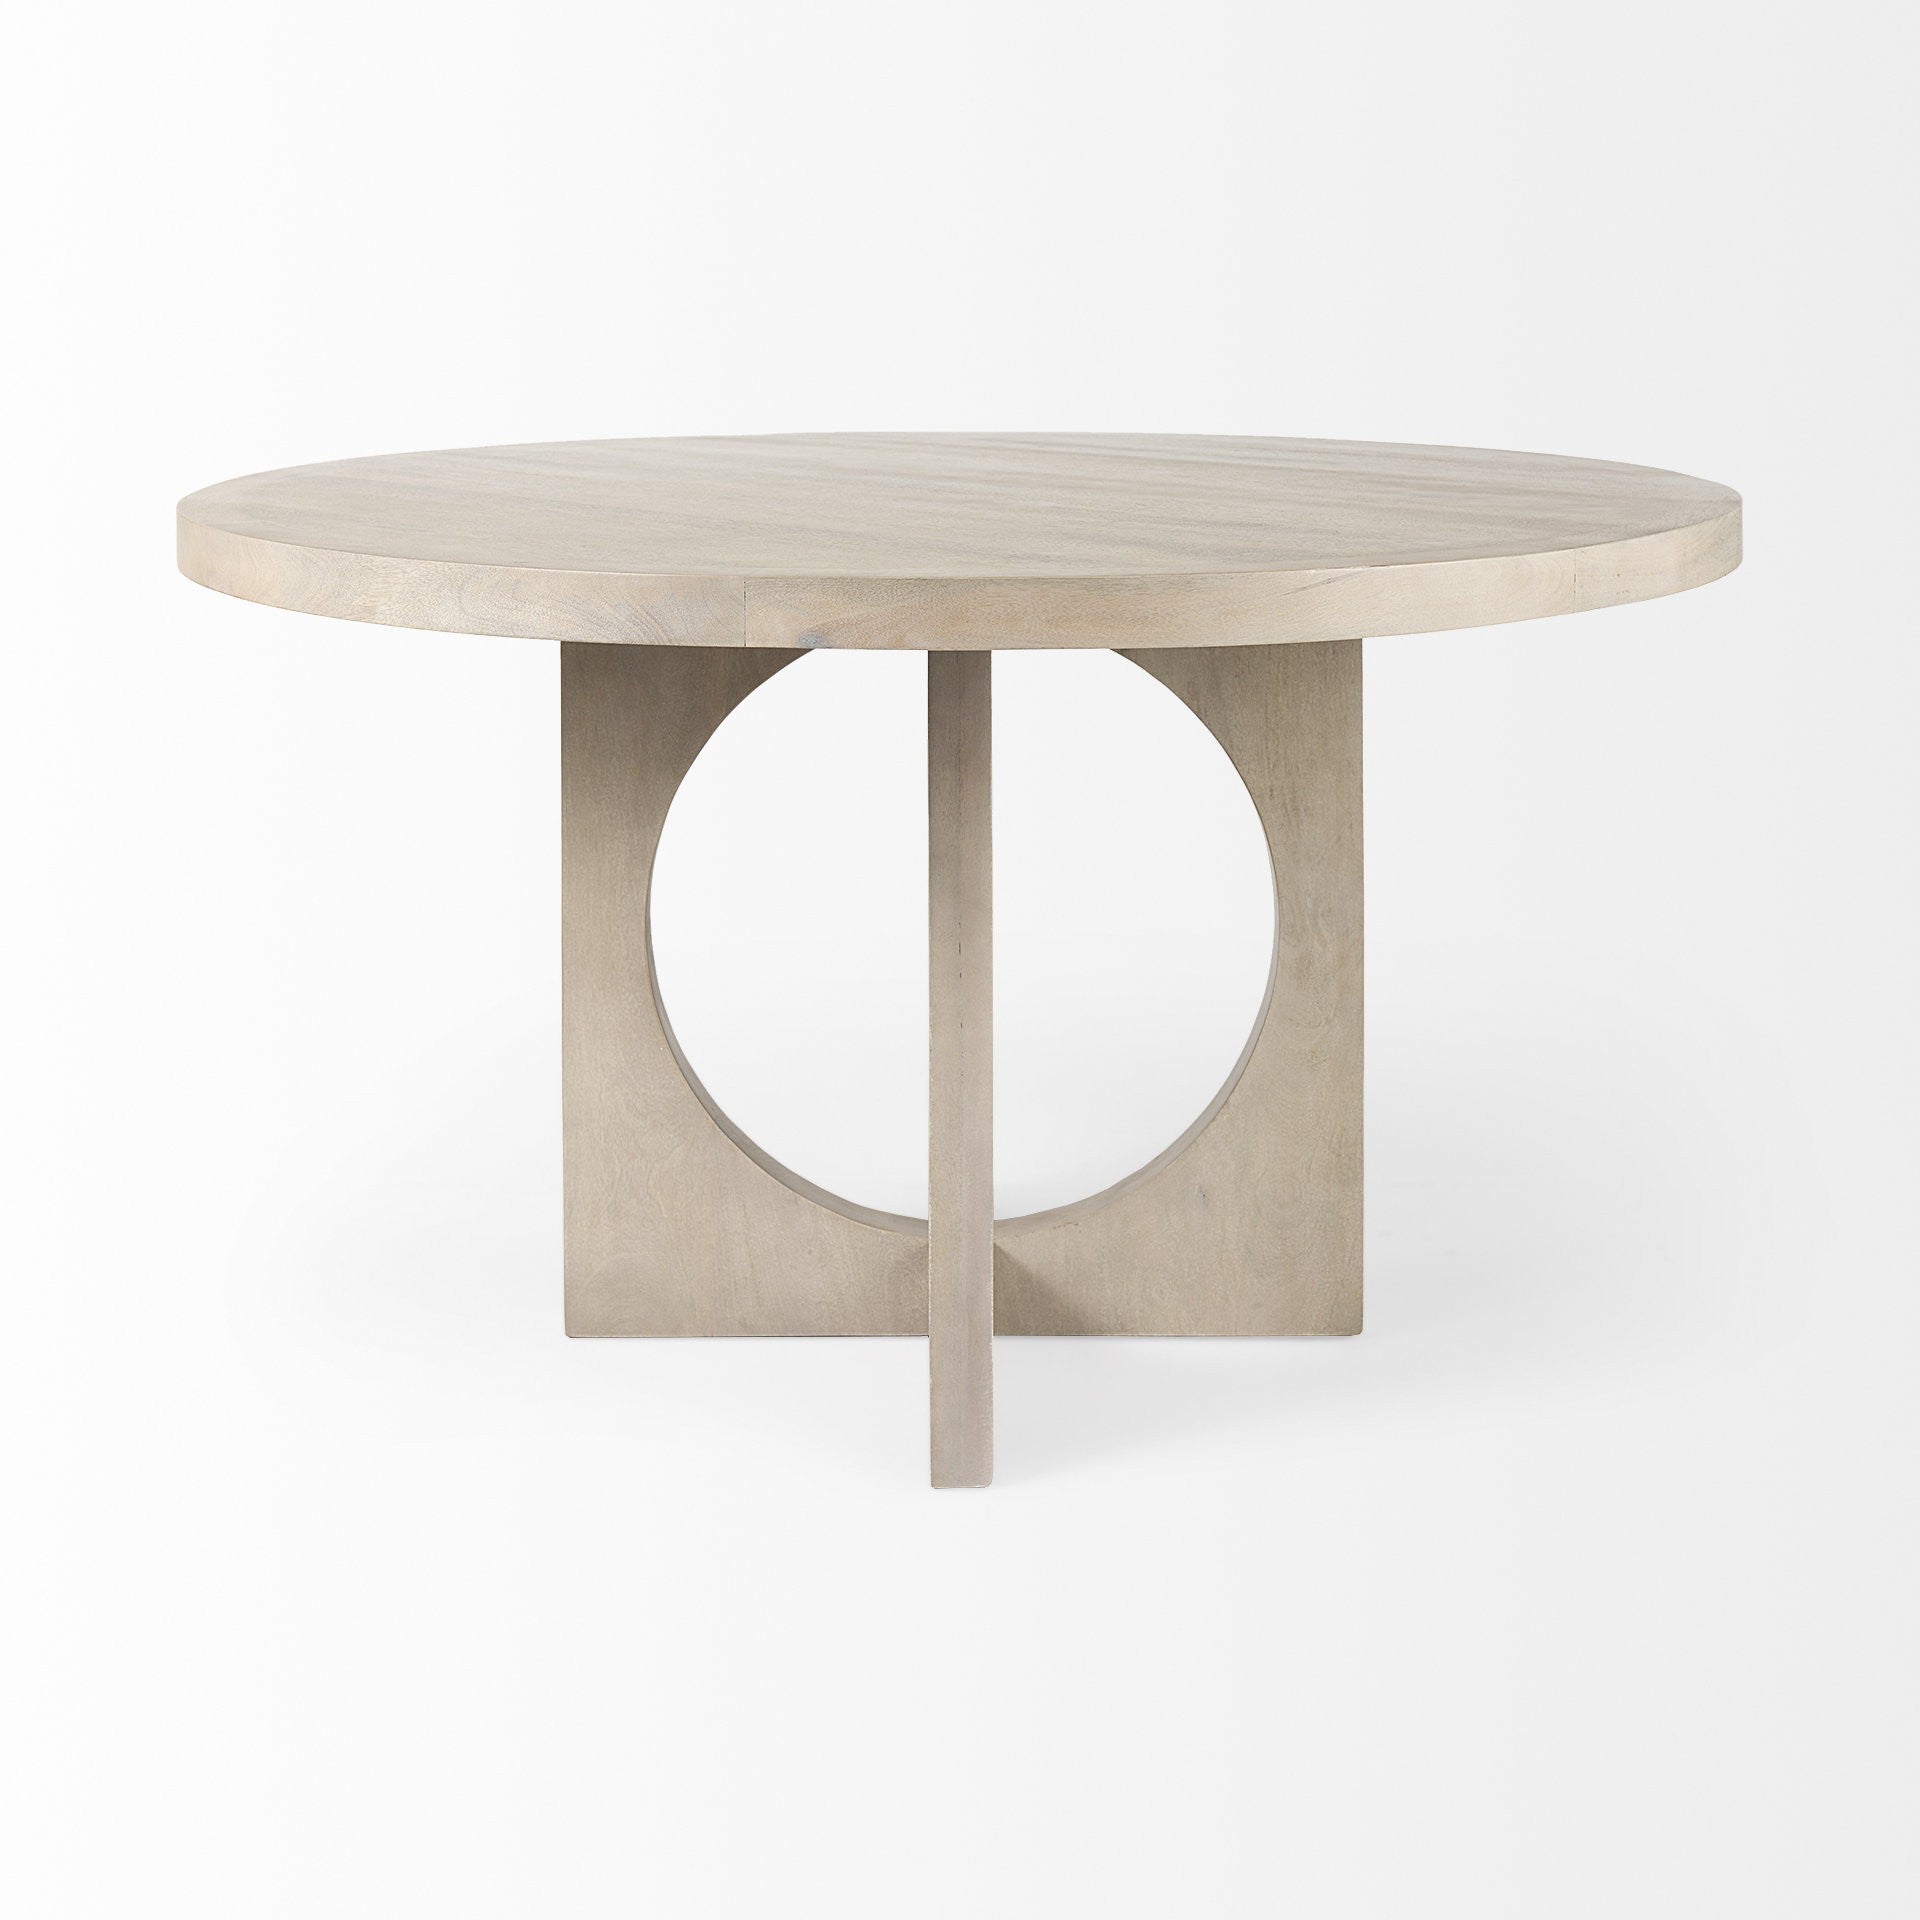 Light Natural Wood Round Geometric Dining Table-1